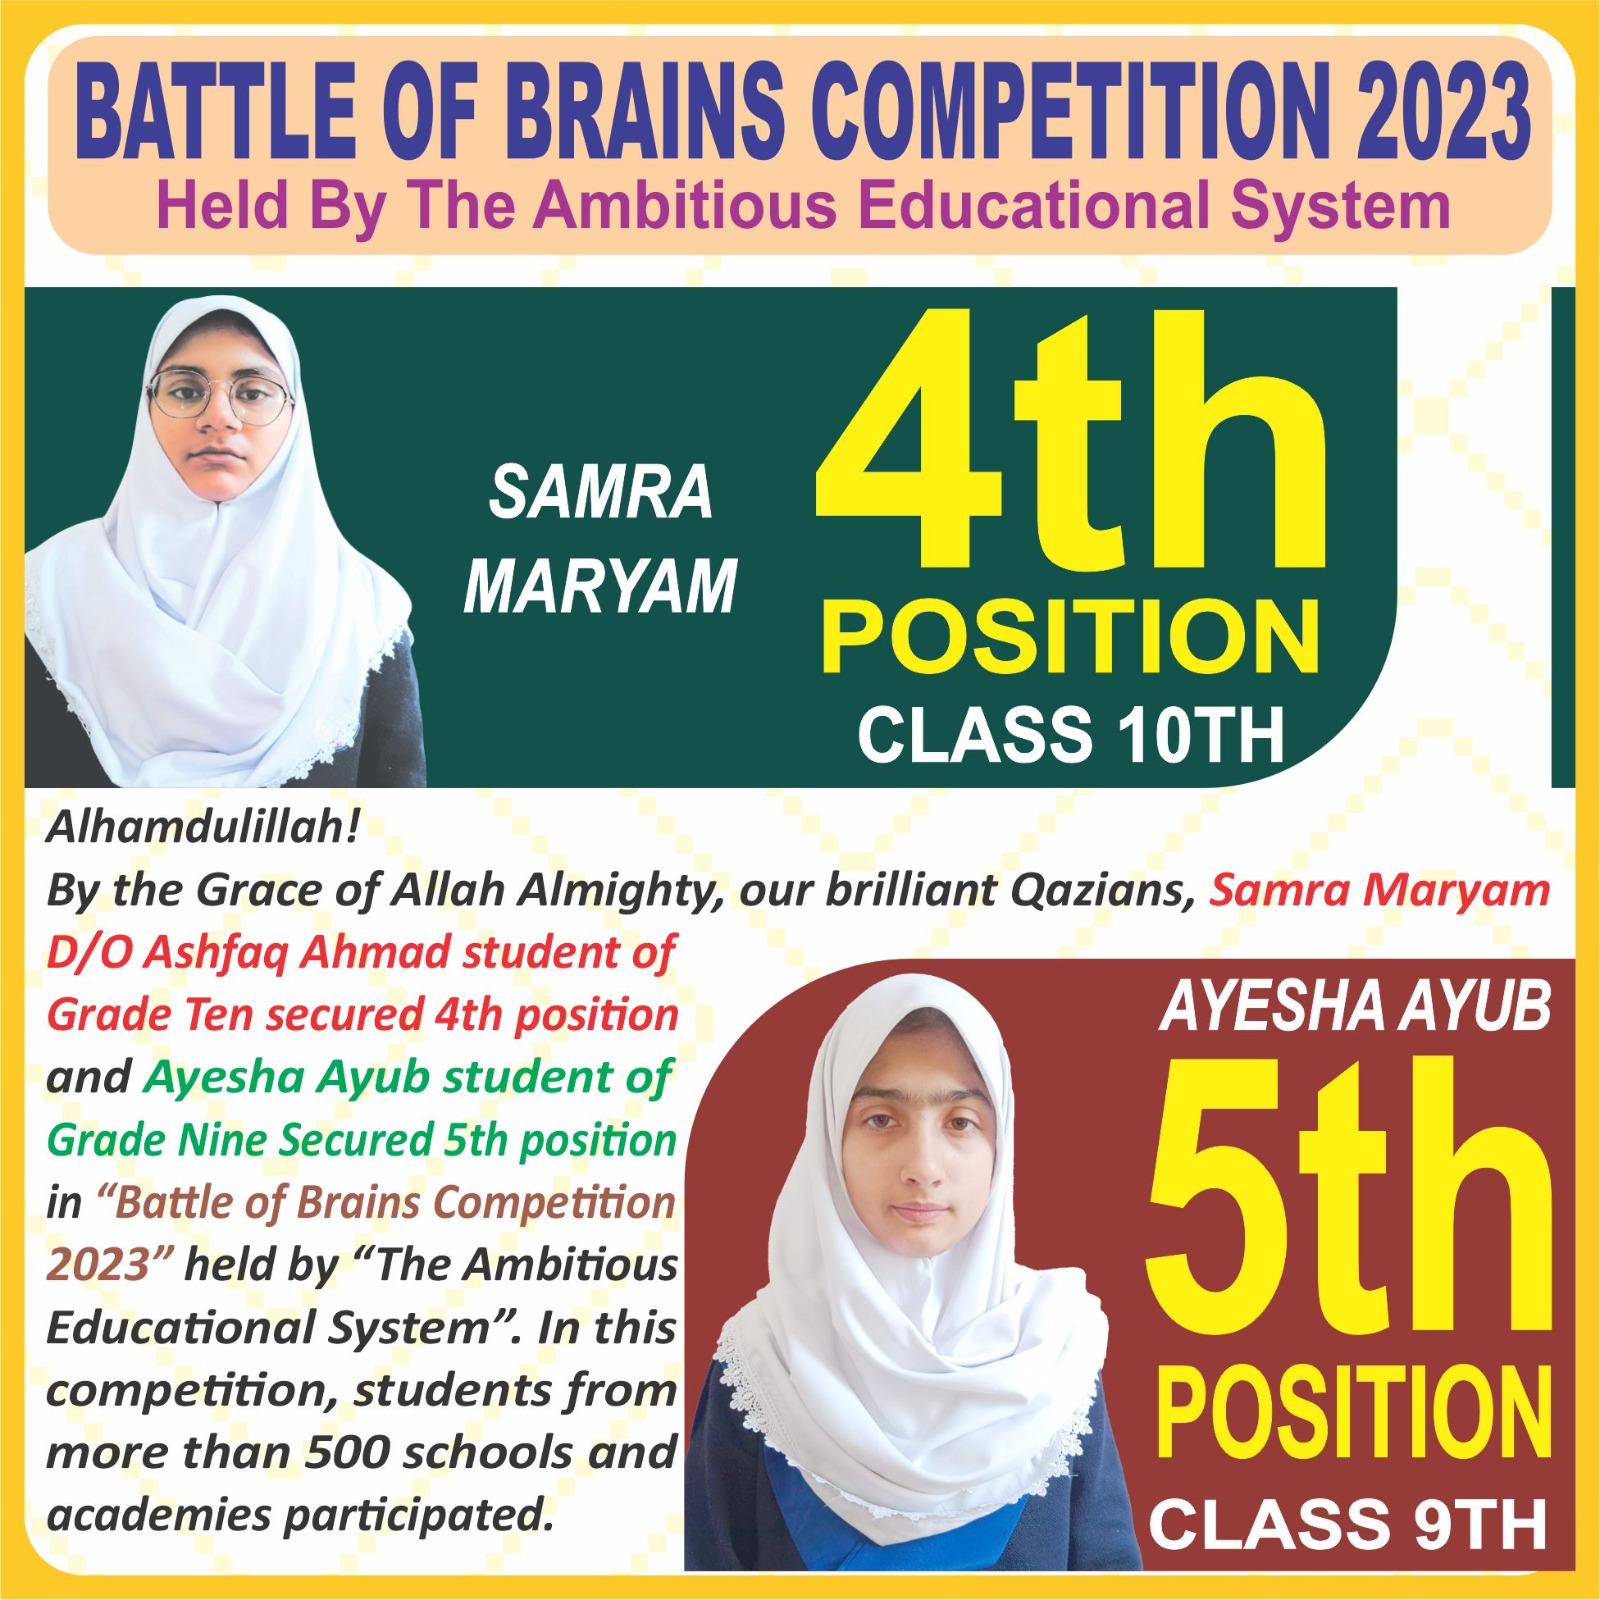 Battle of Brains Competition 2023